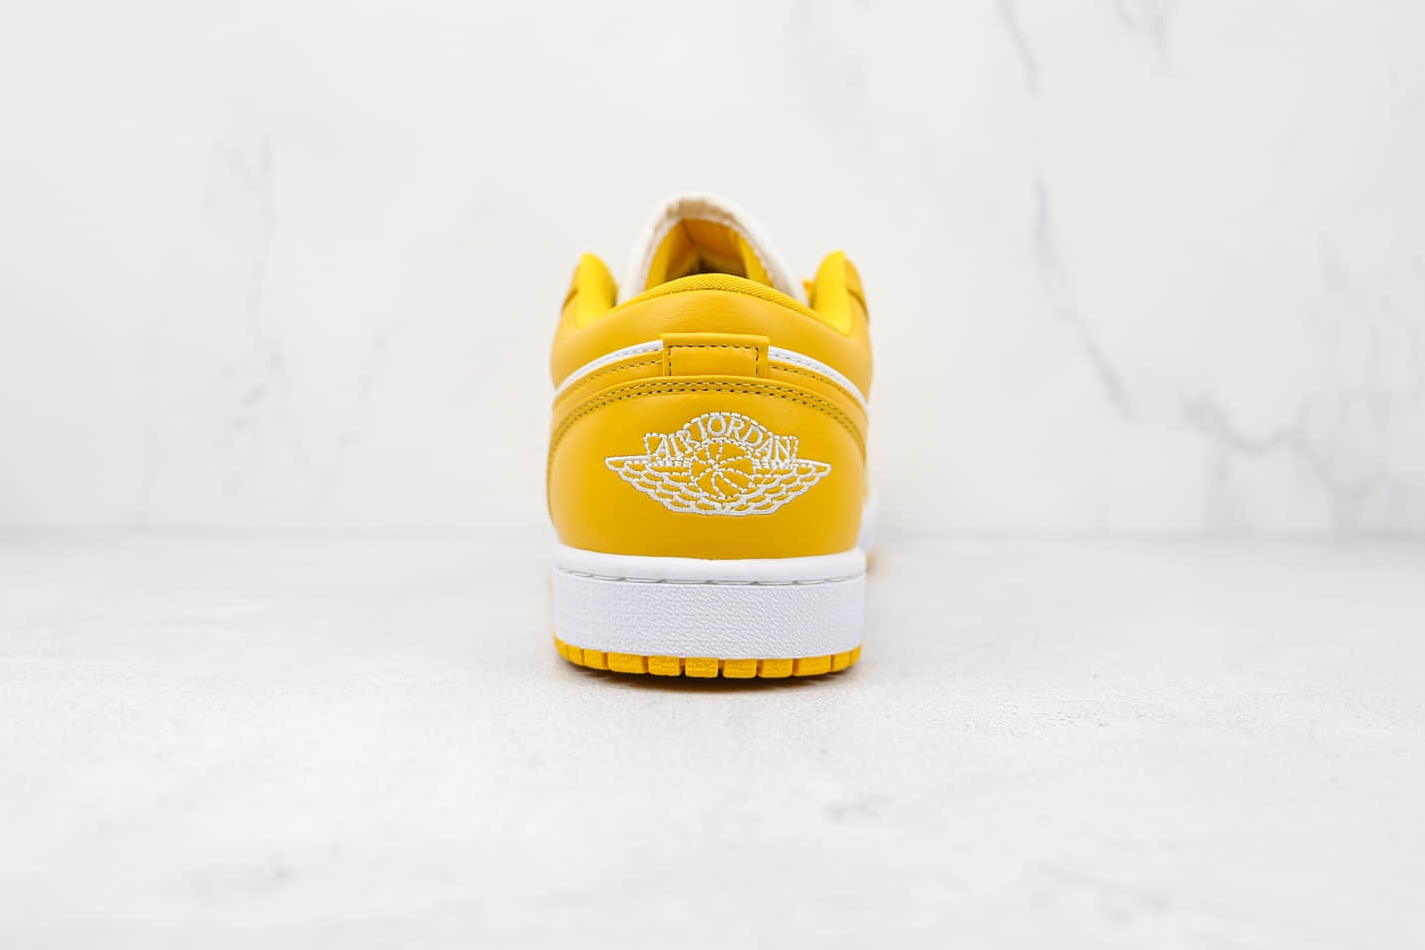 Air Jordan 1 Low 'Pollen' - Stylish and Iconic Sneakers for Men - Limited Edition!